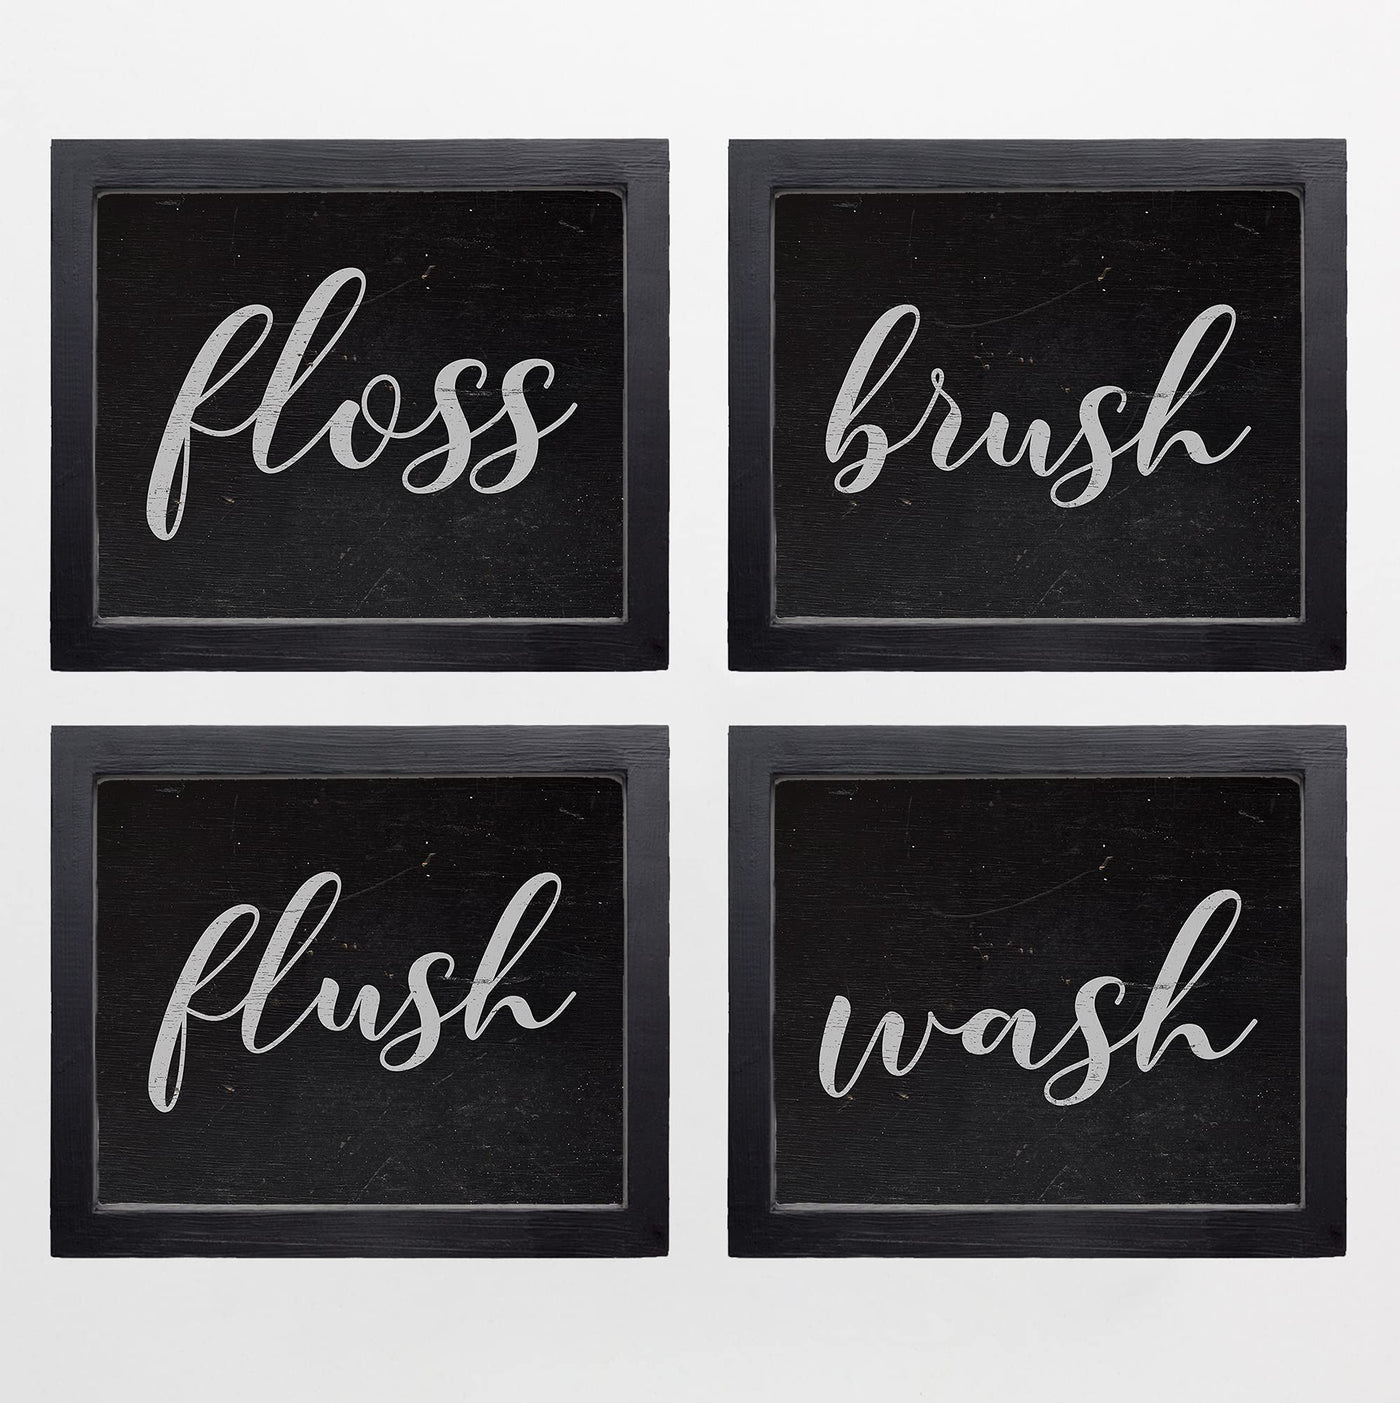 Floss-Brush-Flush-Wash Funny Bathroom Decor-Set of (4)-10 x 8" Typographic Wall Prints-Ready to Frame. Rustic Farmhouse Design. Humorous Signs-Fun Home-Guest Bathroom Decor! Printed on Photo Paper.